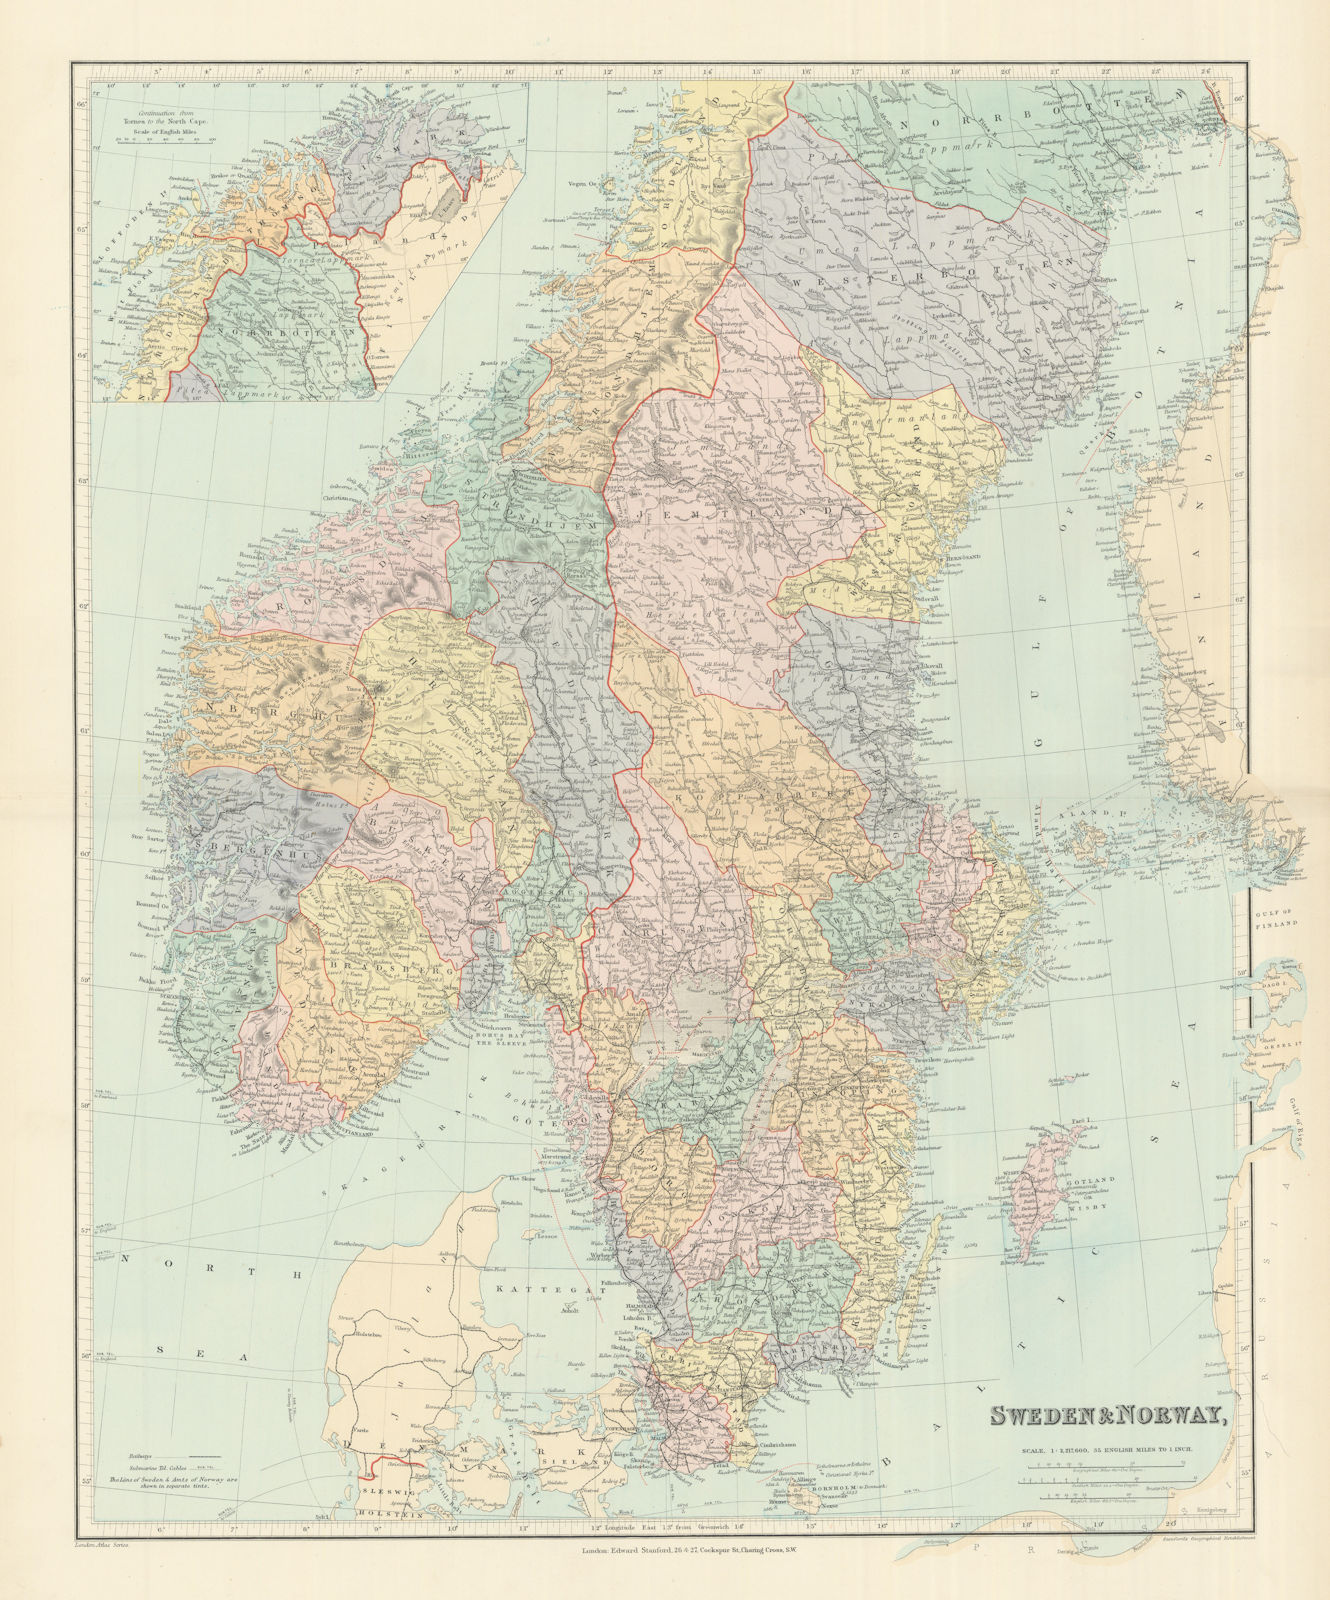 Associate Product Scandinavia physical mountains fjords glaciers. Sweden Norway. STANFORD 1894 map